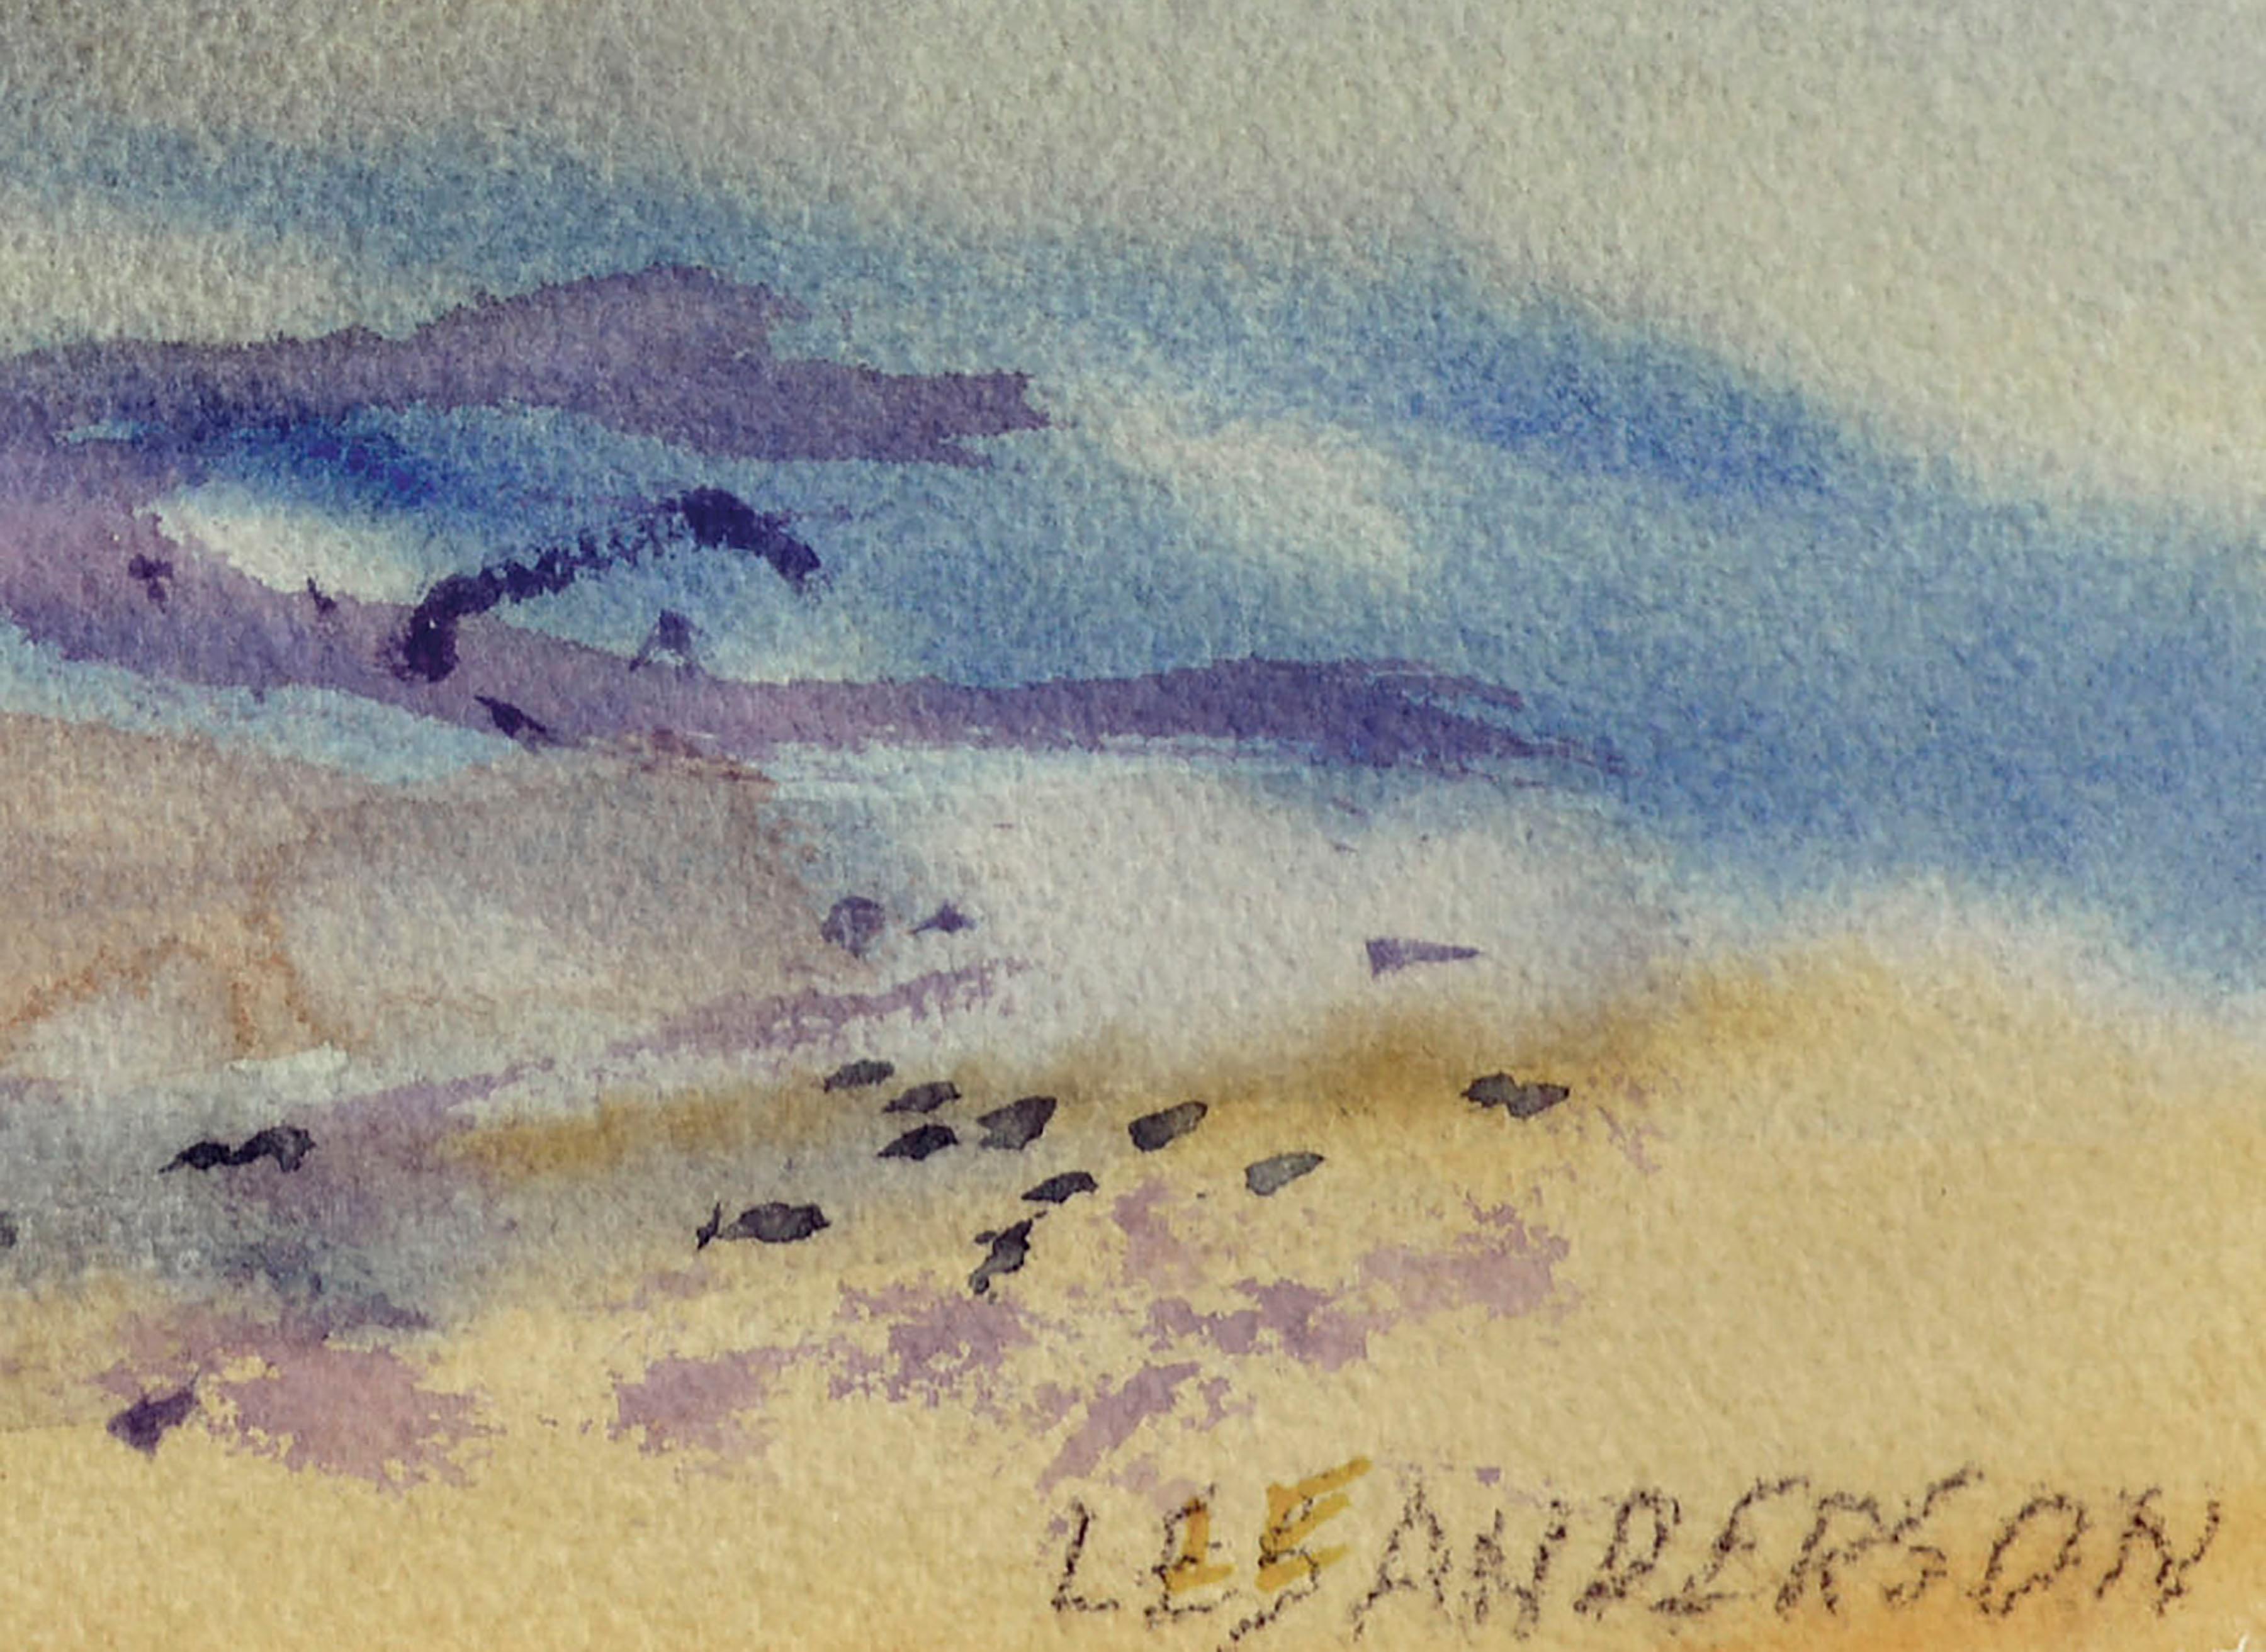 Beautiful vintage watercolor seascape in soft pastel colors by Les (Leslie Luverne) Anderson (American, 1928-2009). From the estate of Les Anderson in Monterey, California. Signed 